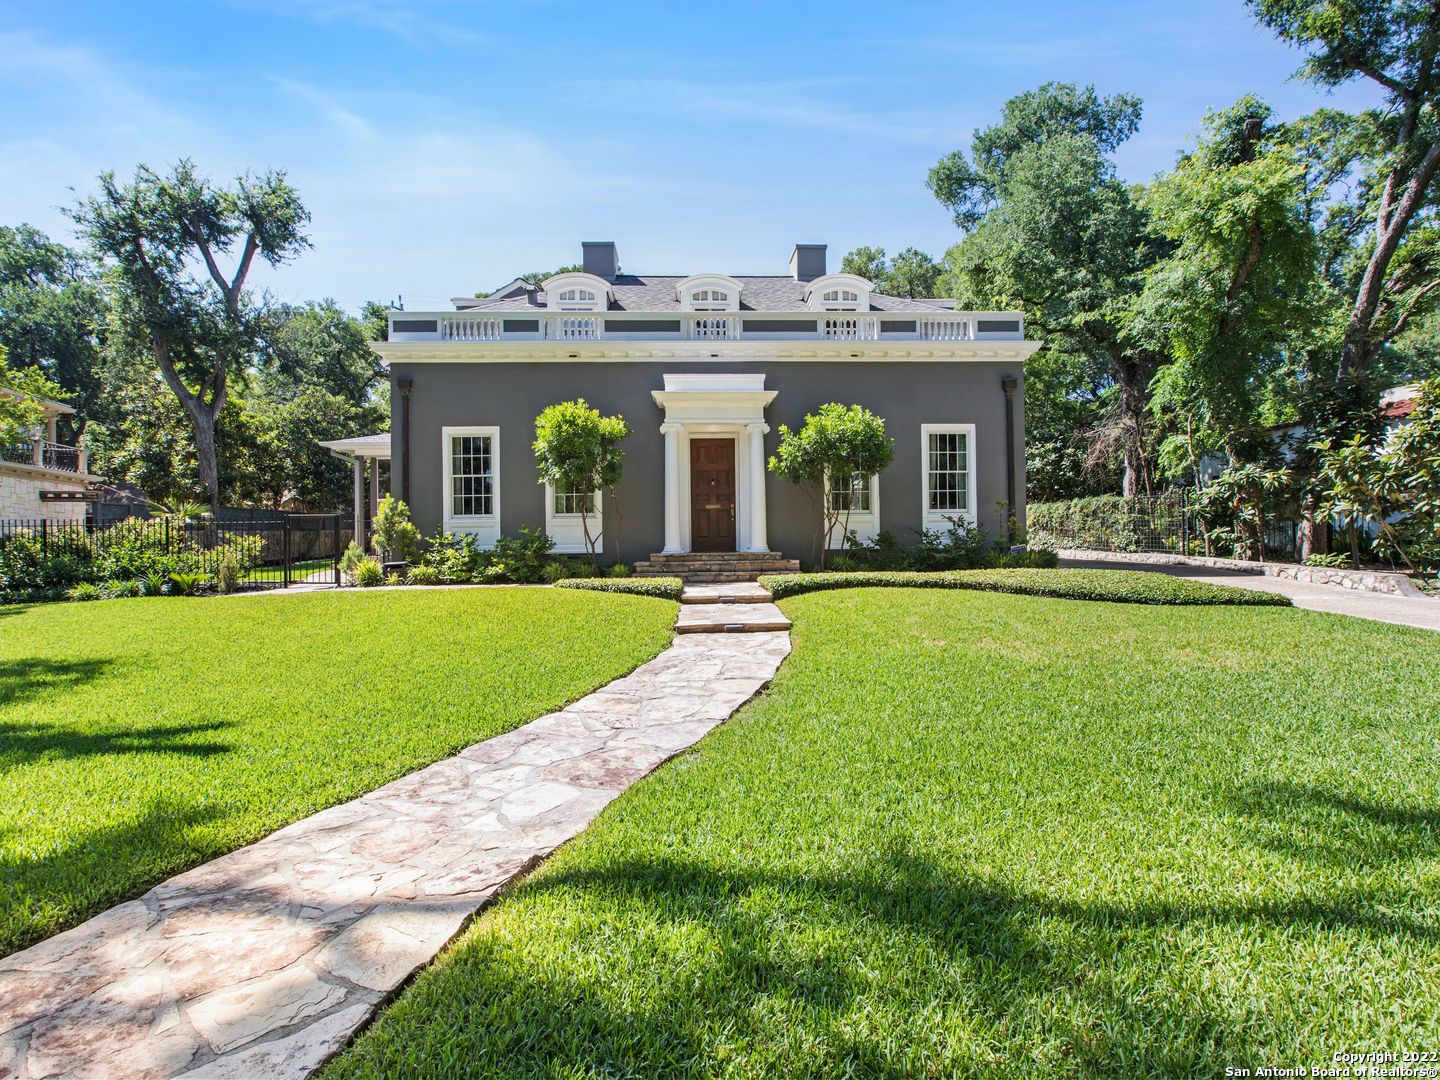 This striking home garners the most elegant and memorable curb appeal on one of the best-treelined streets in Olmos Park! The property has been meticulously and lovingly updated throughout the years to blend the grace of the original 1928 home with today's luxuries. The entrance is sophisticated yet approachable with the original solid wood door welcoming guests, a gentle curving staircase with custom wrought iron railing, updated sconces, and the original wood parquet floors which flow seamlessly into the formal dining and living rooms. The spacious formal living room becomes draped in soft natural light during the day and boasts the 1928 stone fireplace. The dining room has pocket doors that can be opened for casual entertaining into the epicurean kitchen or closed for more intimate dinner parties. The circular layout of the downstairs is perfect for entertaining and hosting large parties as the kitchen flows into the breakfast banquet, with an architectural coved ceiling the is featured throughout the home, and continues into the large family room. Serval patio doors lead to either the 350 sqft screened-in porch for lounging and watching the game year round or to the inviting flagstone patio with built-in seating and an outdoor kitchen with a gas range and green egg. There is a wine bar/butler's pantry, washer/dryer, and half bath on the first level for convince as well. There are two staircases to access the 2nd level, continuing the easy flow up to the 3 guest bedrooms with 2 bathrooms, perfect for guests or little ones. The primary suite is an absolute stunner! Recently updated, the coved ceiling in the bedroom creates a relaxing and calming environment coupled with light-filled patio doors that open onto a screened-in porch with gorgeous custom tile for morning coffee or evening wine. The bathroom is one to remember with exquisite tile flooring, multiple vanities with honed Carrera marble counters, a generous walk-in shower, custom brass fixtures and lights, a coffee bar, and second Bosch washer & dryer. No expense spared for luxury and convenience! Please do not miss the 630 sqft casita with living room which could easily be used as a large home office, a bedroom, and full bathroom for guests. 114 Park Hill is truly a special and unique home in the best location that is ready for the next stewards to continue the love and adoration all owners have experienced while living in this stately masterpiece.